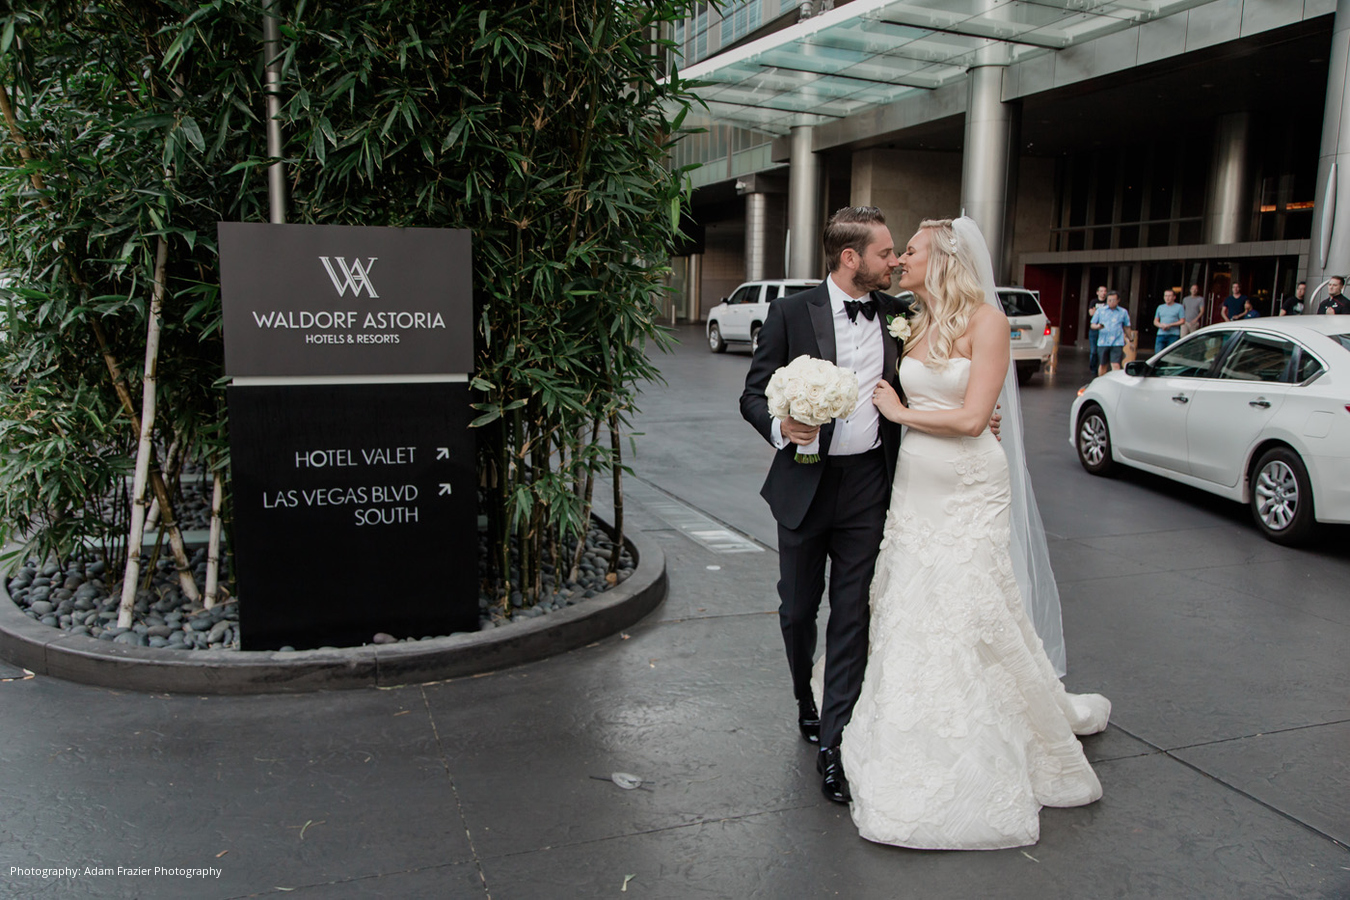 Adam Frazier Photography - Congratulations to Jackie and Kent where were  married this last Sat at the Waldorf Astoria!